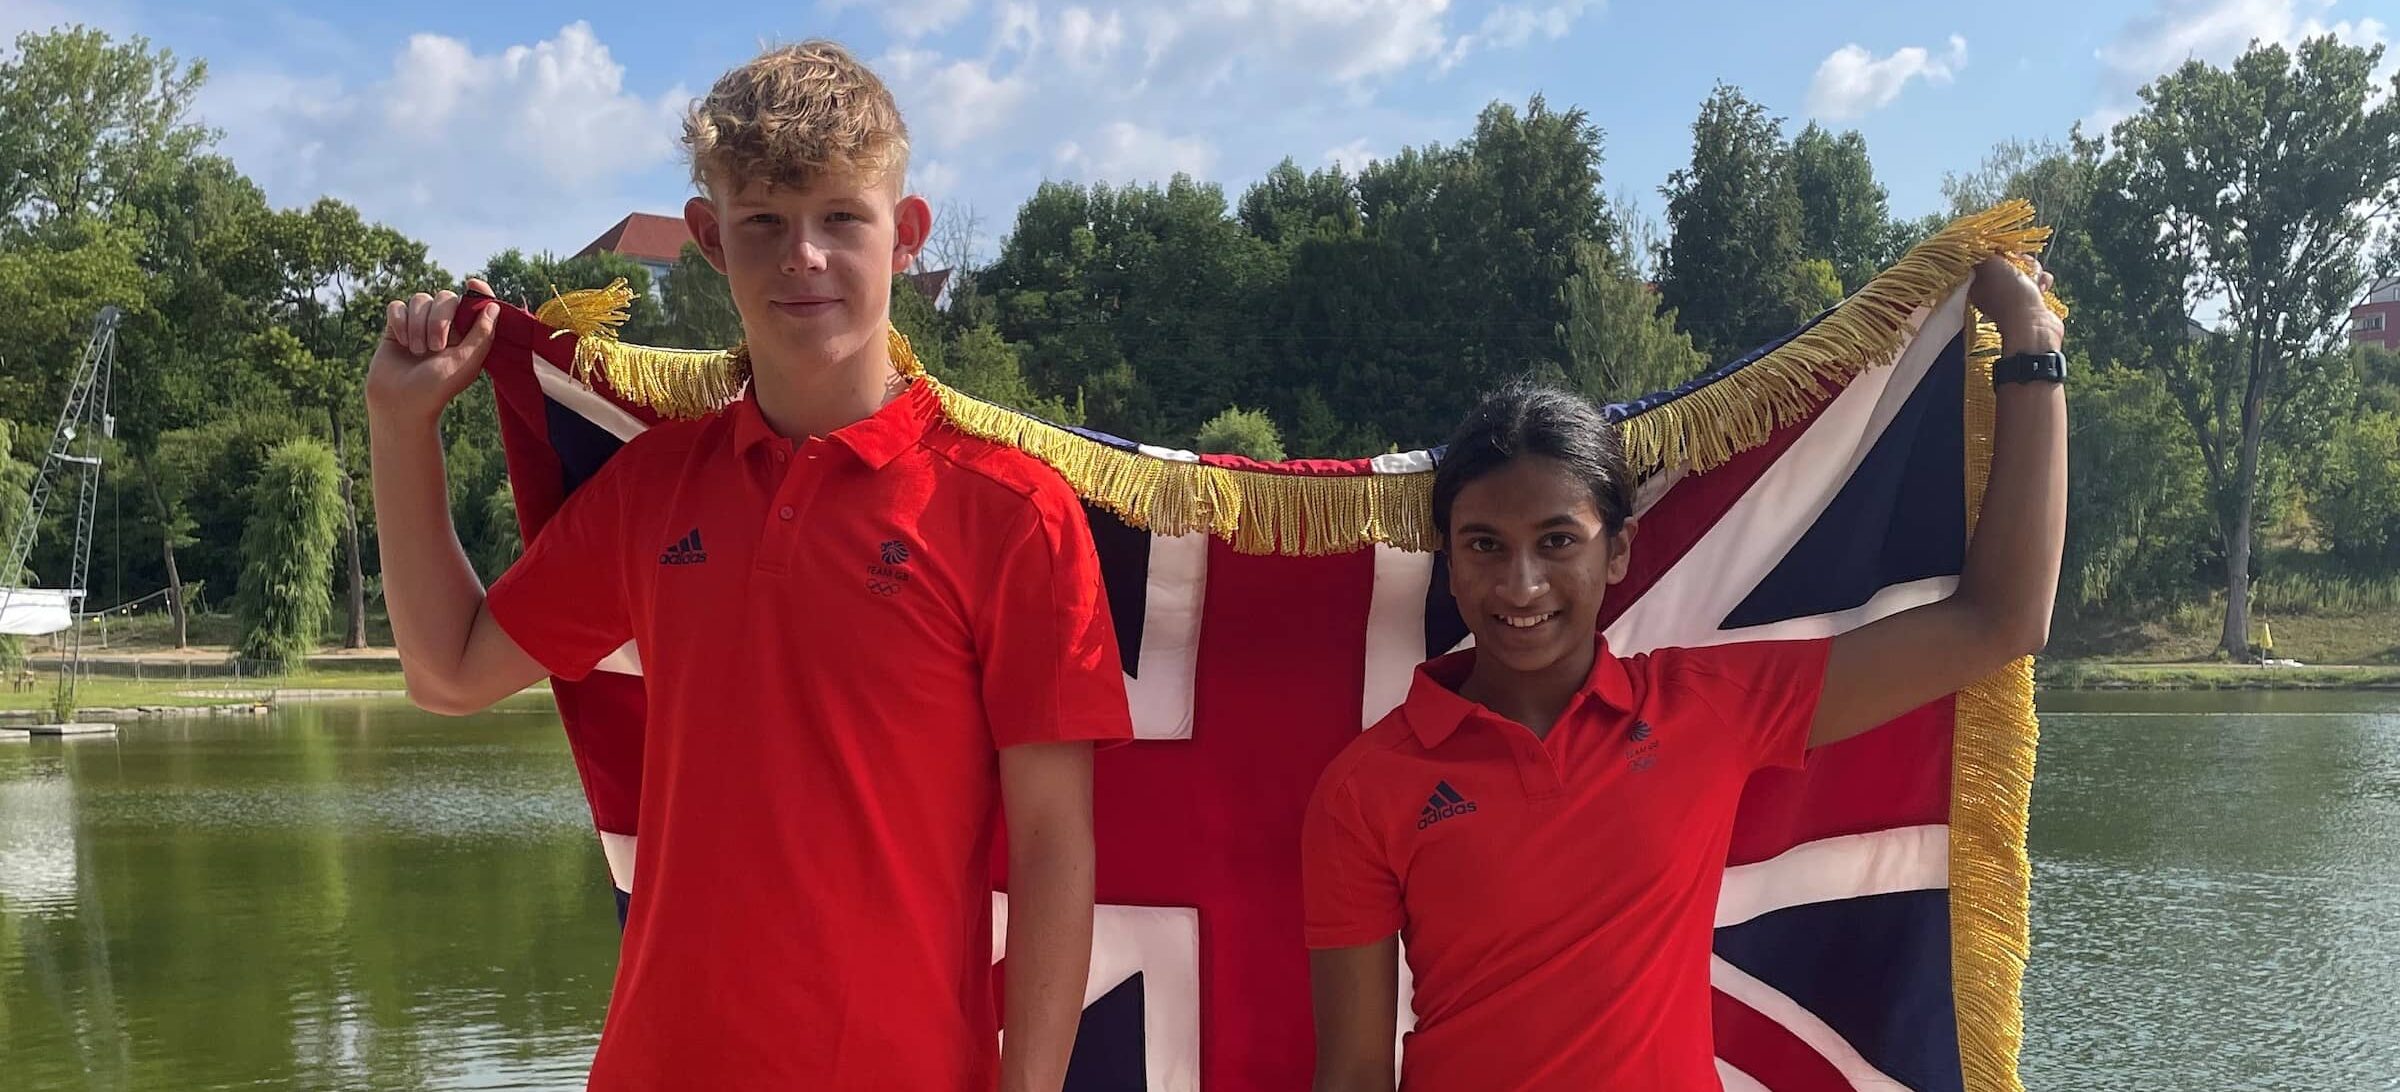 Varsha kumar and finlay tarling to carry flag at banská bystrica opening ceremony